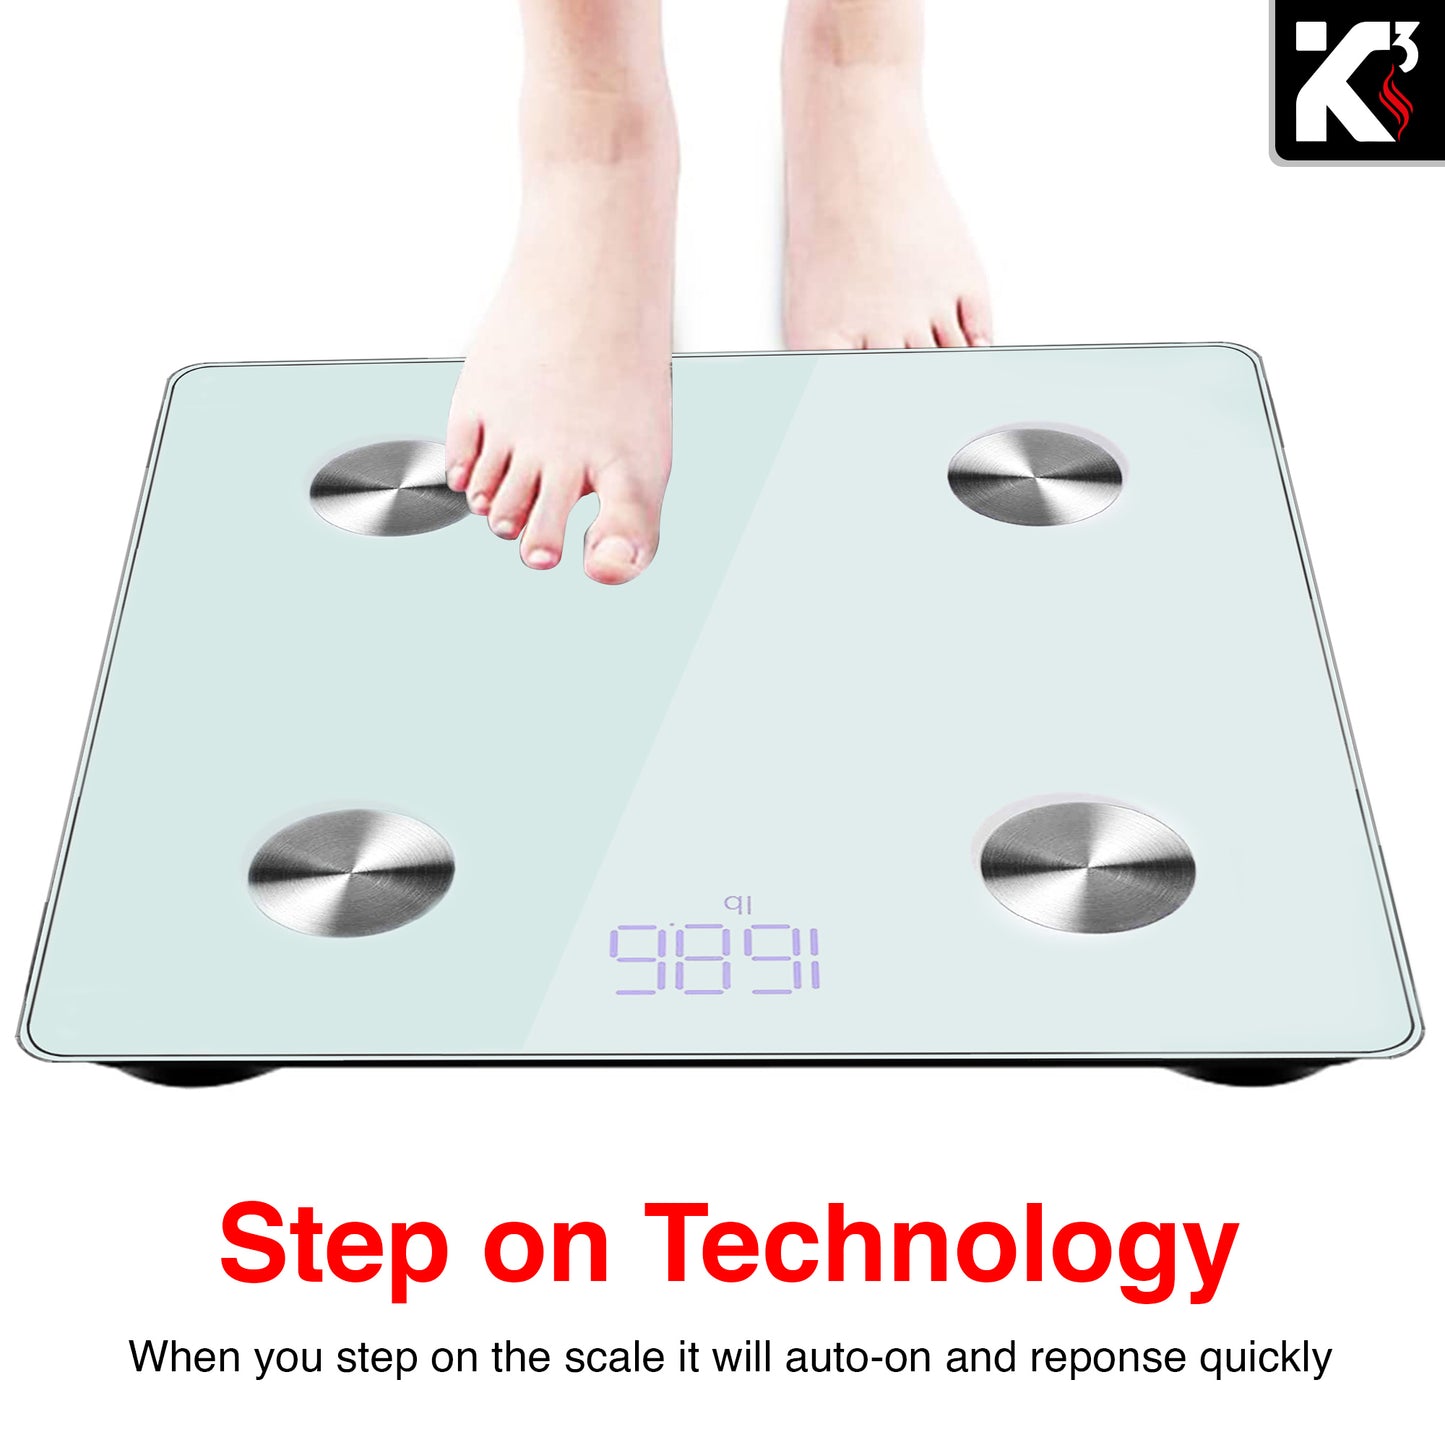 Kcubeinc 2 Pieces Smart Digital Bathroom Weighing Scale with Body Fat and Water Weight for People, Bluetooth BMI Electronic Body Analyzer Machine, 400 lbs. BBS DOT B WH